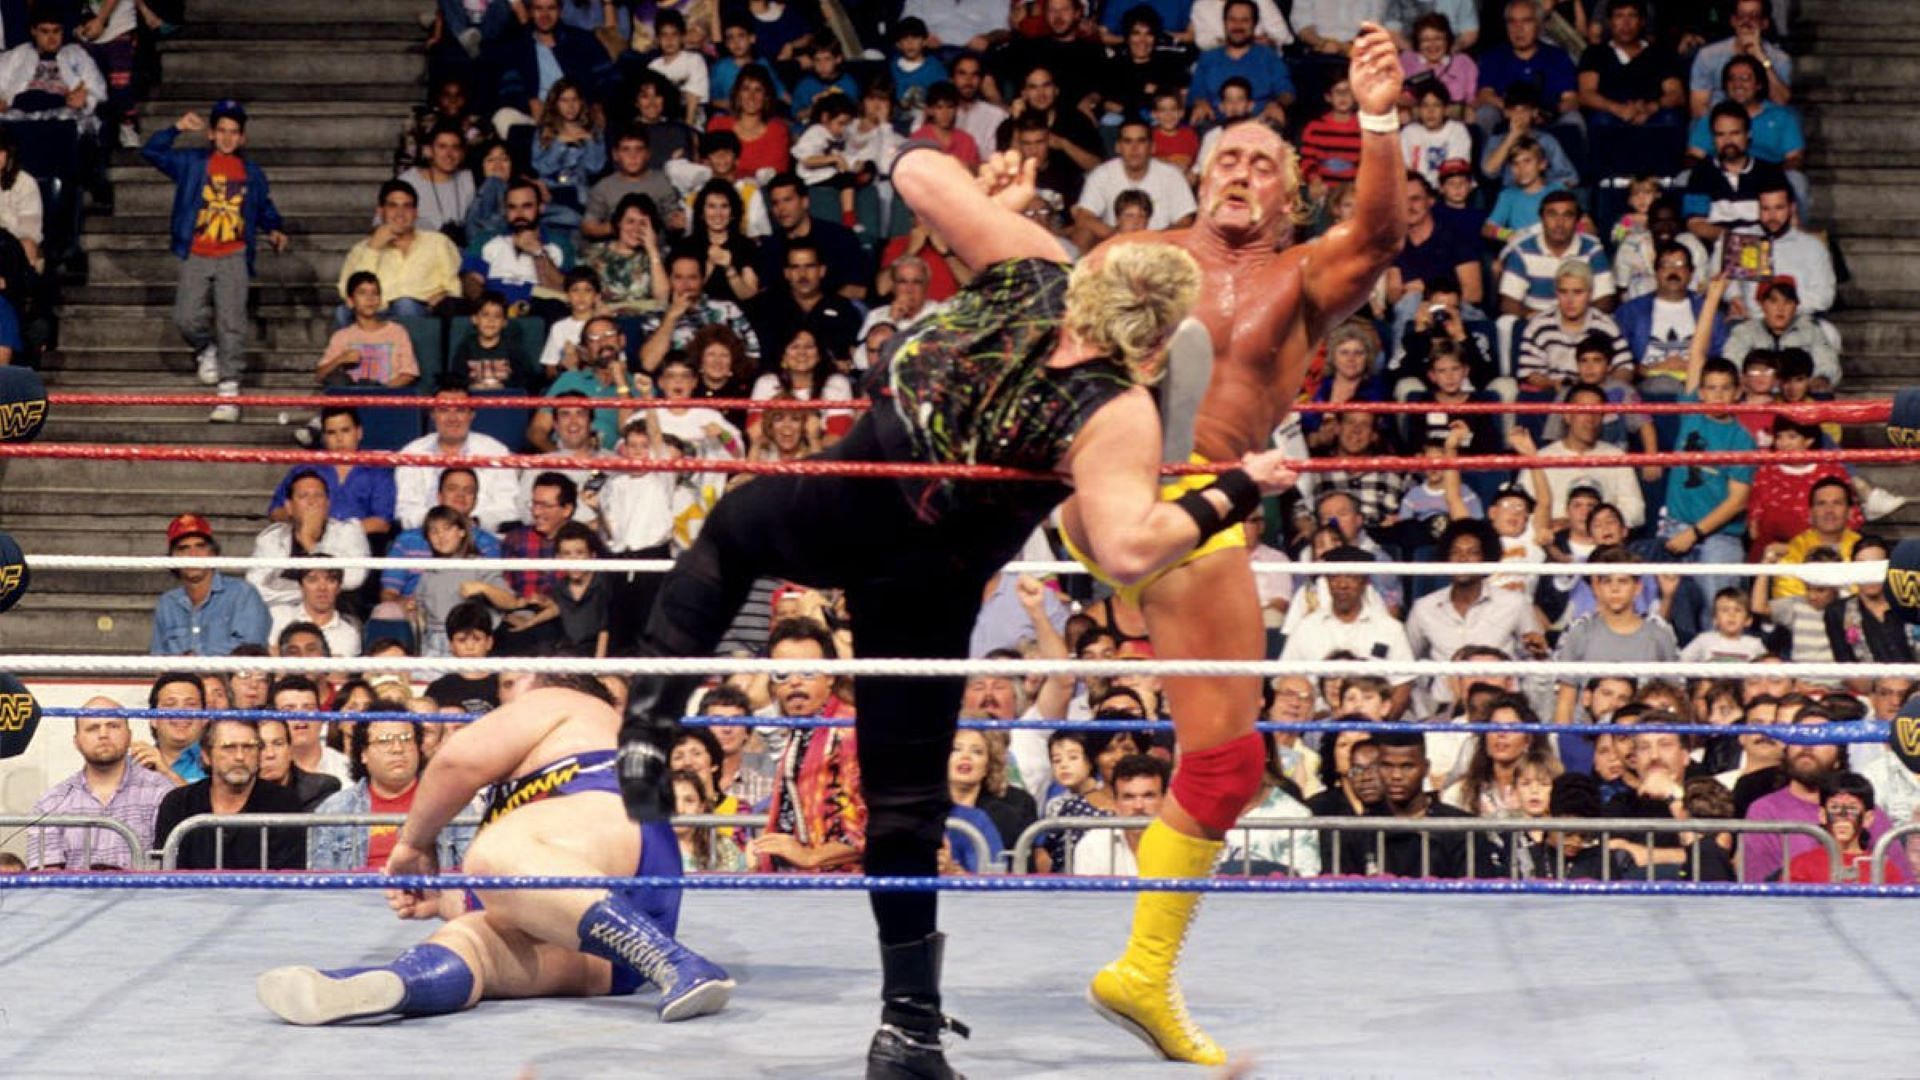 Hulk Hogan has eliminated many stars in the Rumble matches.